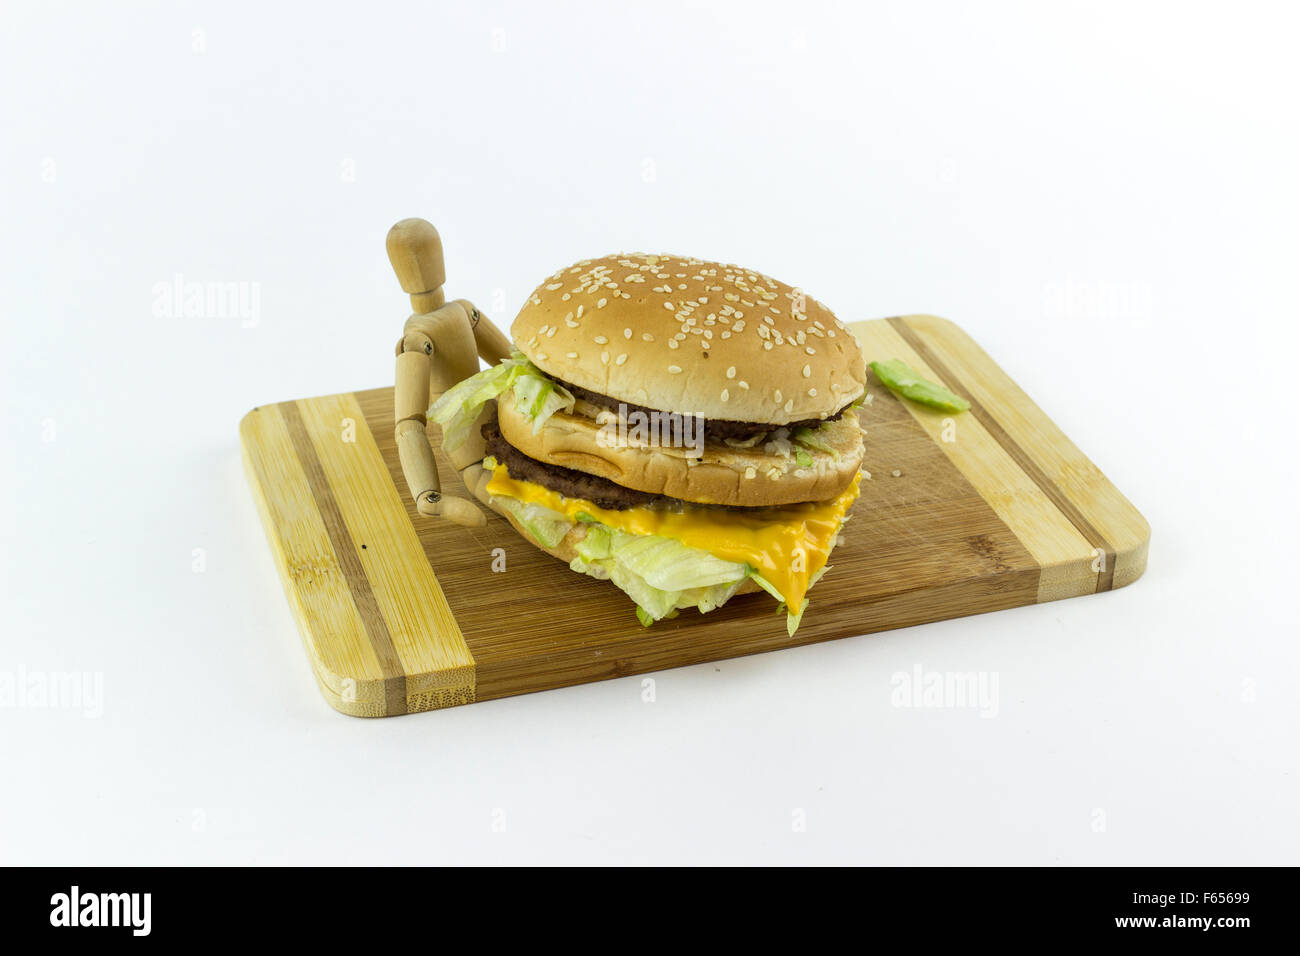 Wooden doll standing on a chopping board against a white background, holding a hamburger Stock Photo